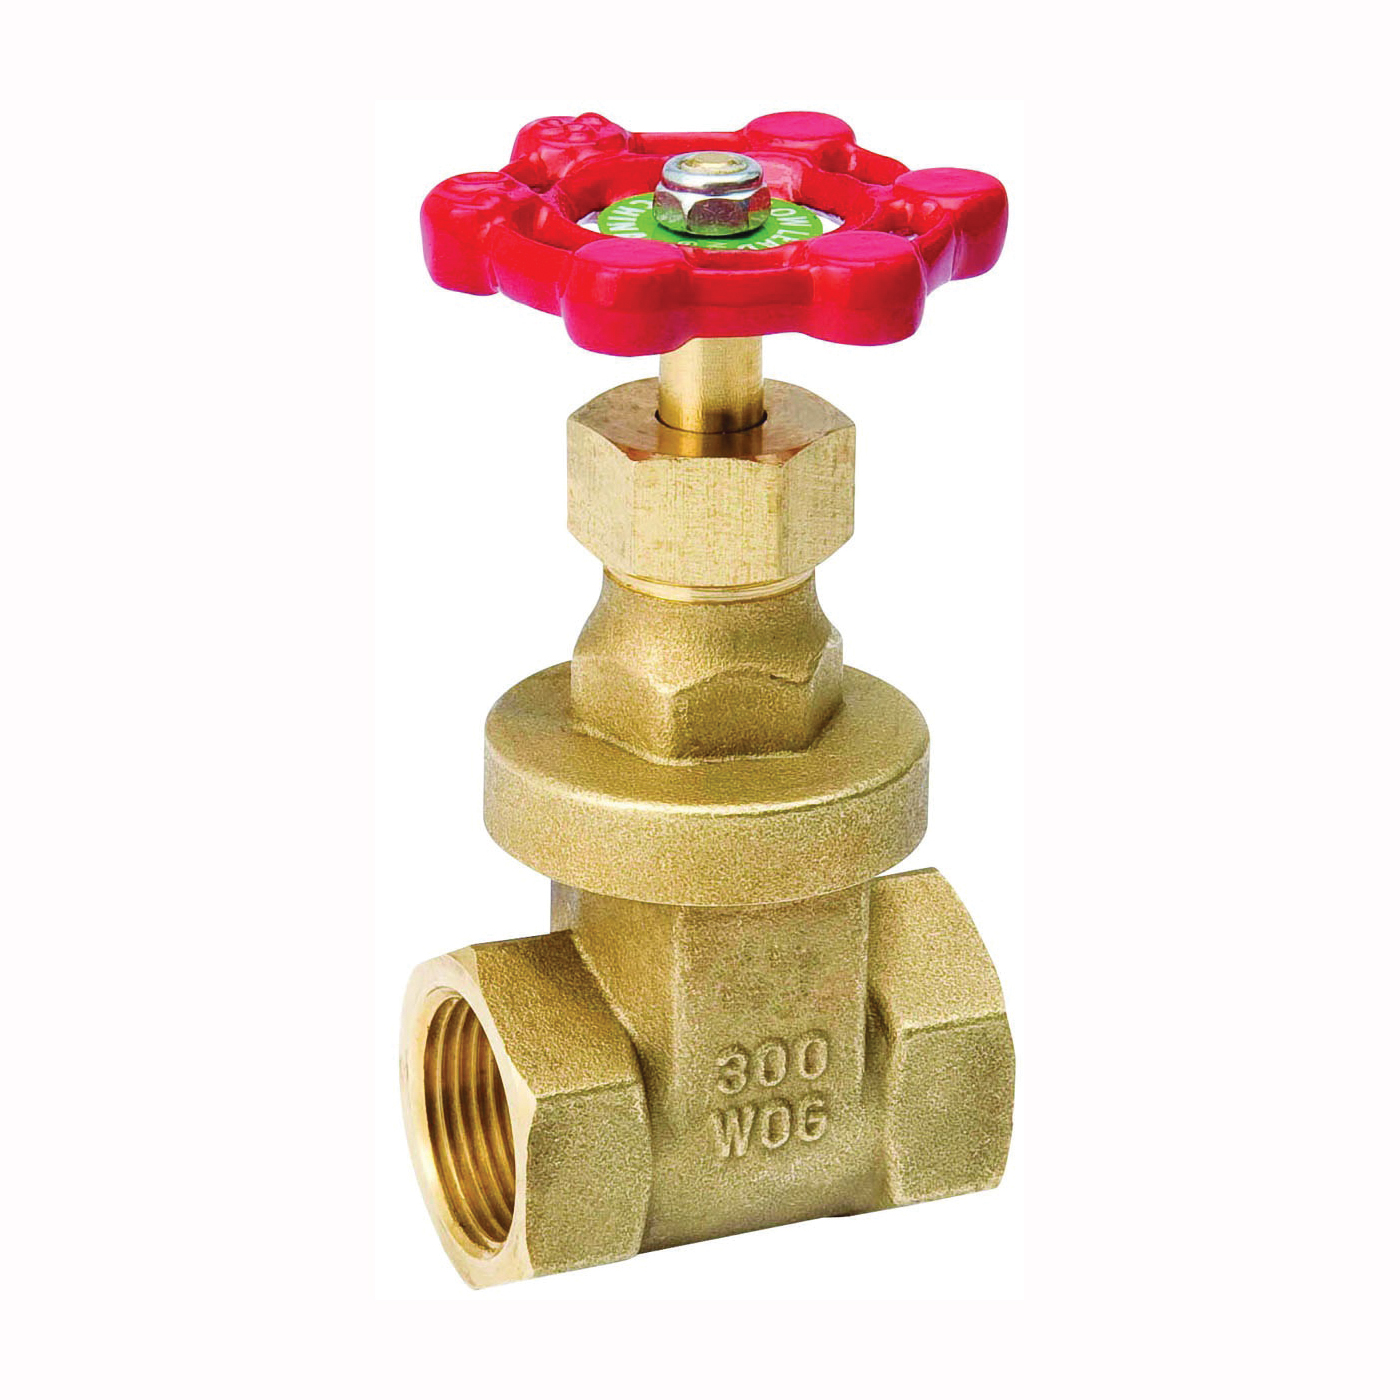 ProLine Series 100-204NL Gate Valve, 3/4 in Connection, FPT, 300/150 psi Pressure, Brass Body